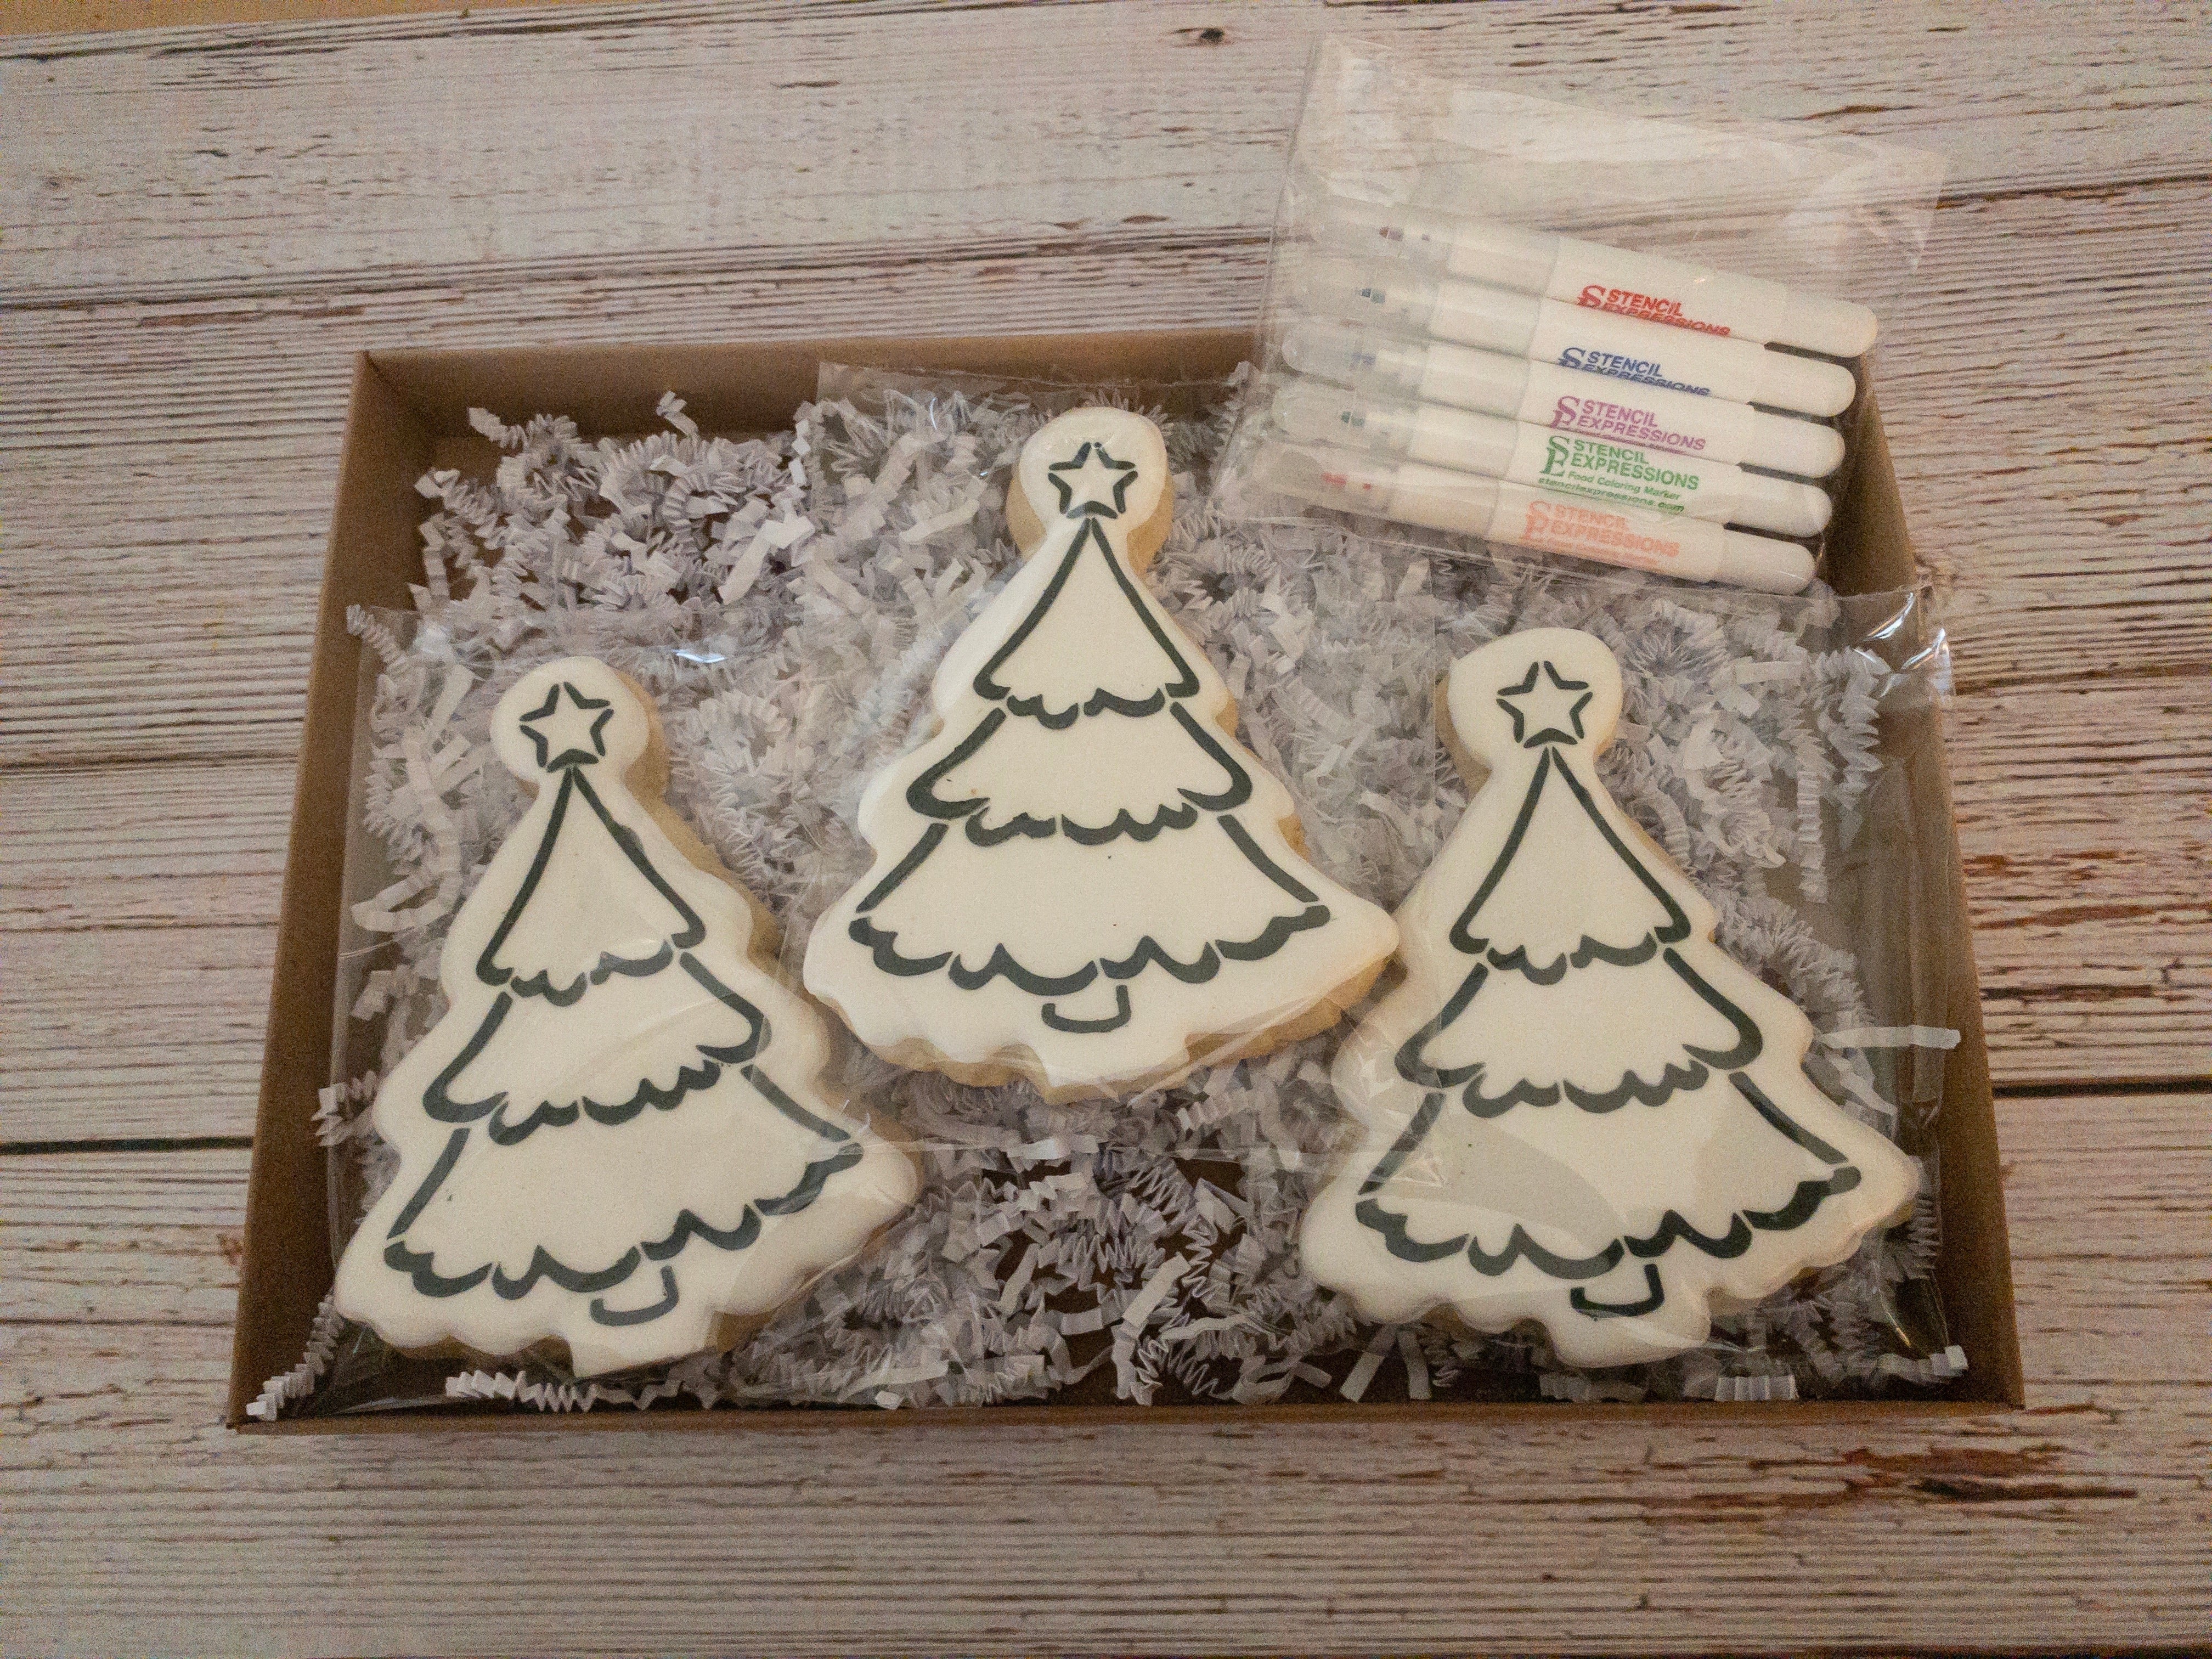 North Pole PYO Tablescape / Mantlescape / Gift Platter Stencil Kit created for The Colorful Cookie Holiday Cookie-A-Thon